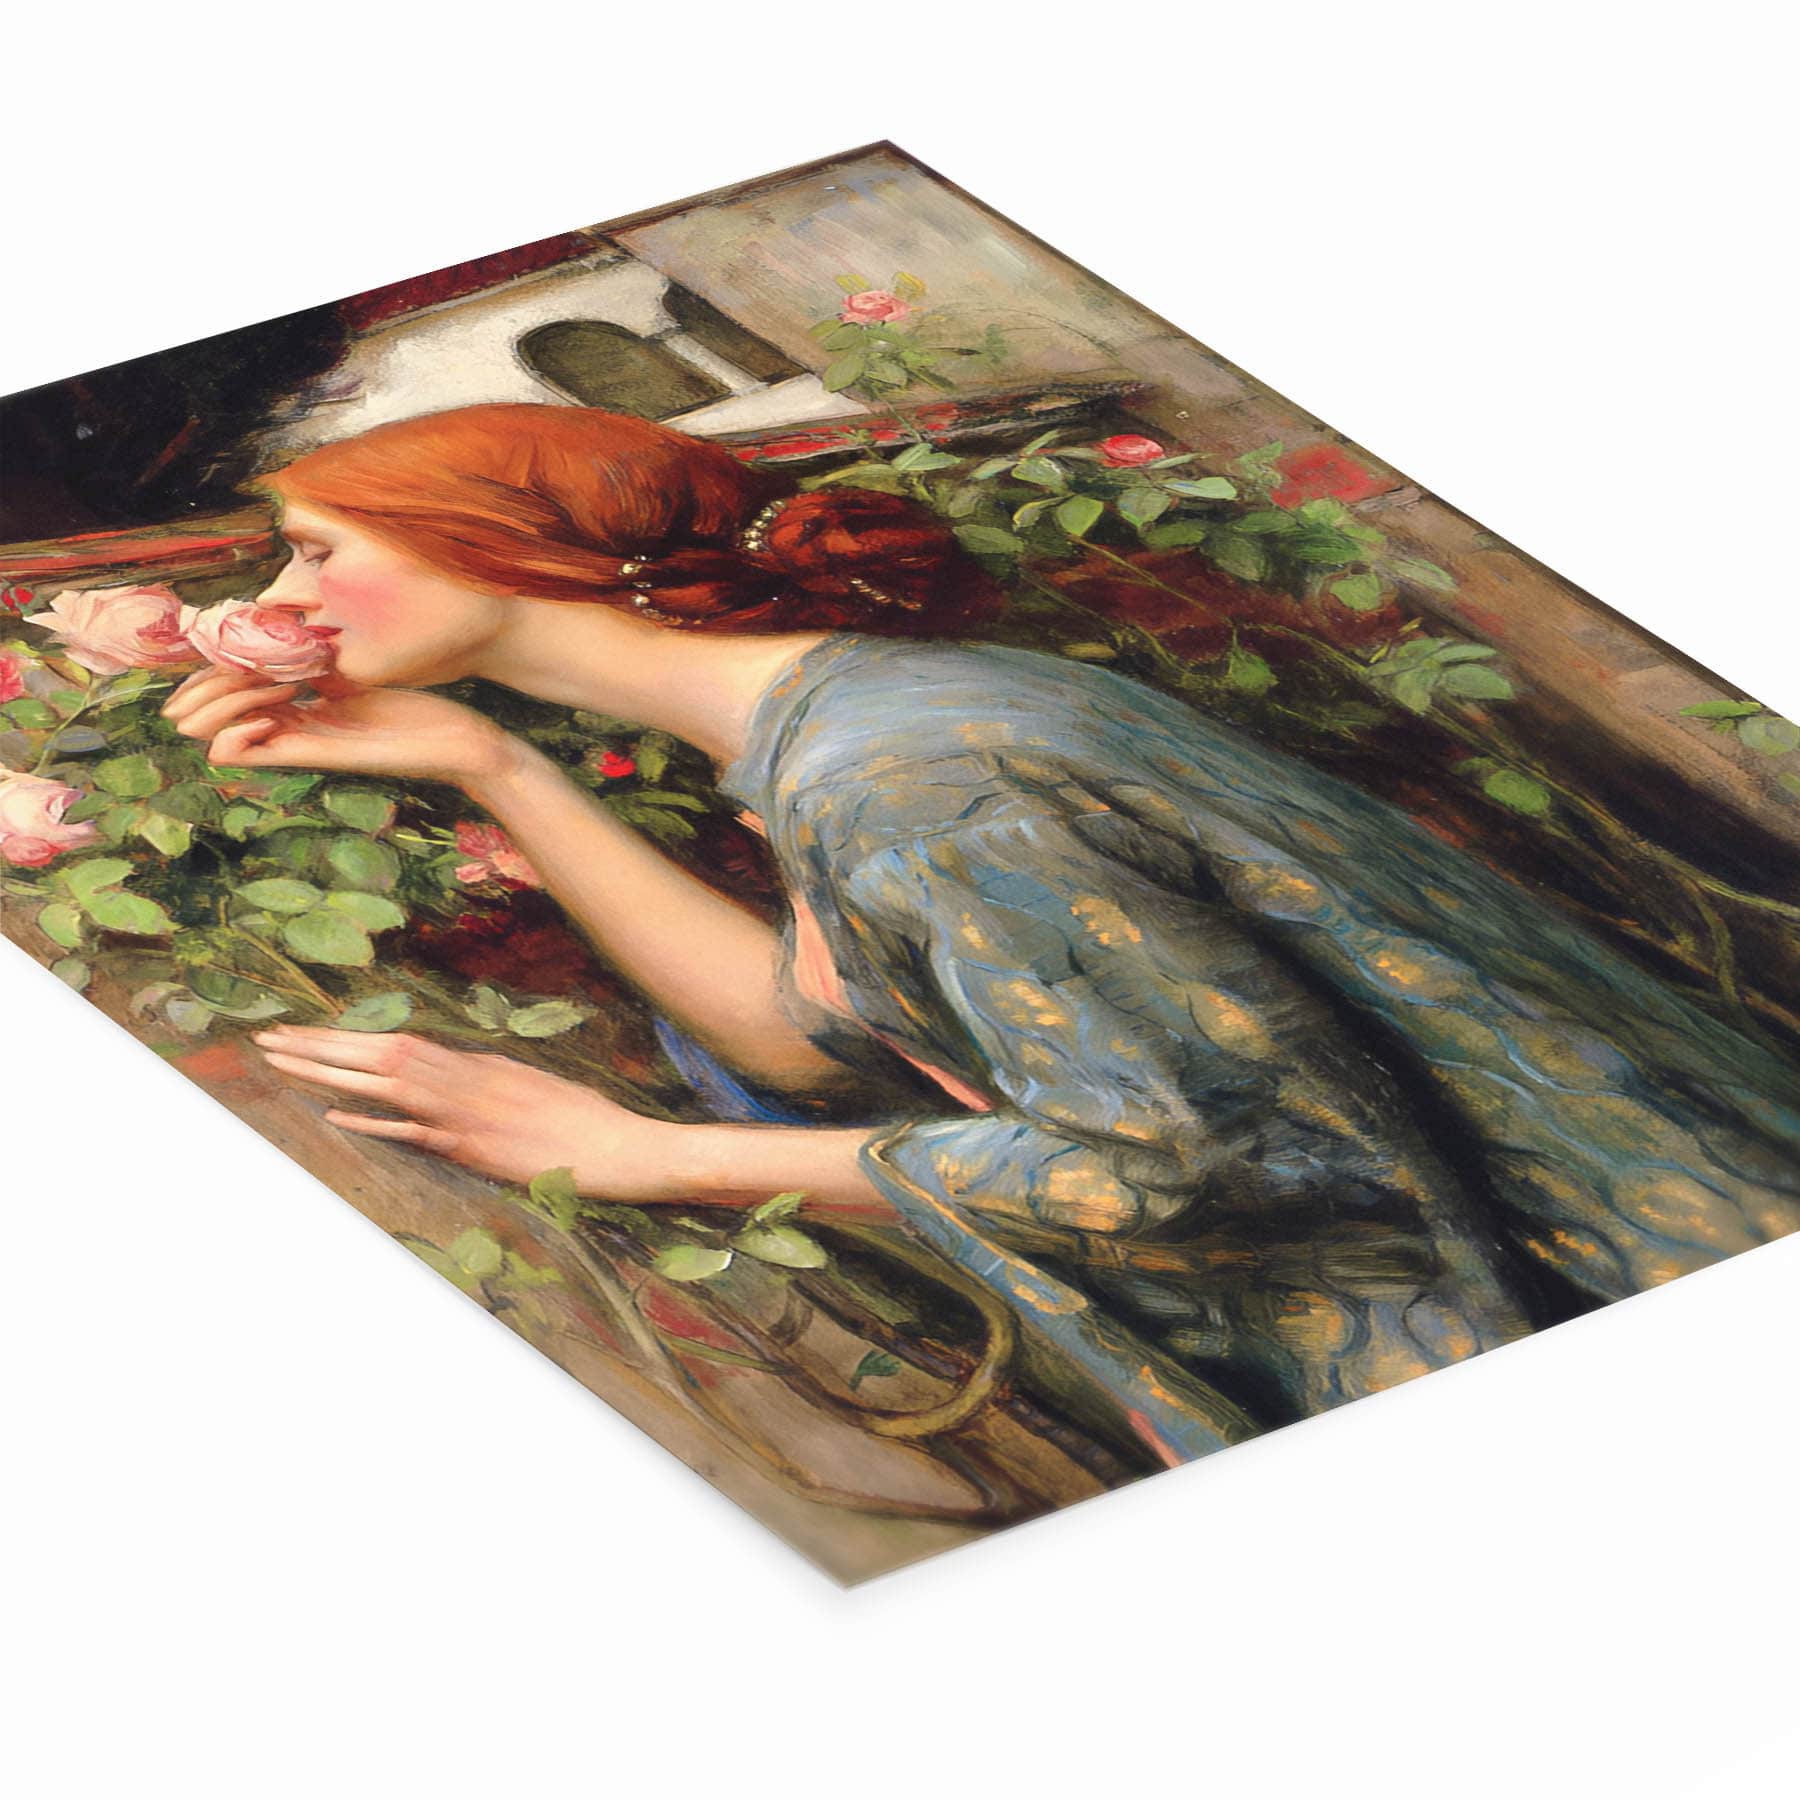 Woman with Red Hair Smelling a Rose Painting Laying Flat on a White Background